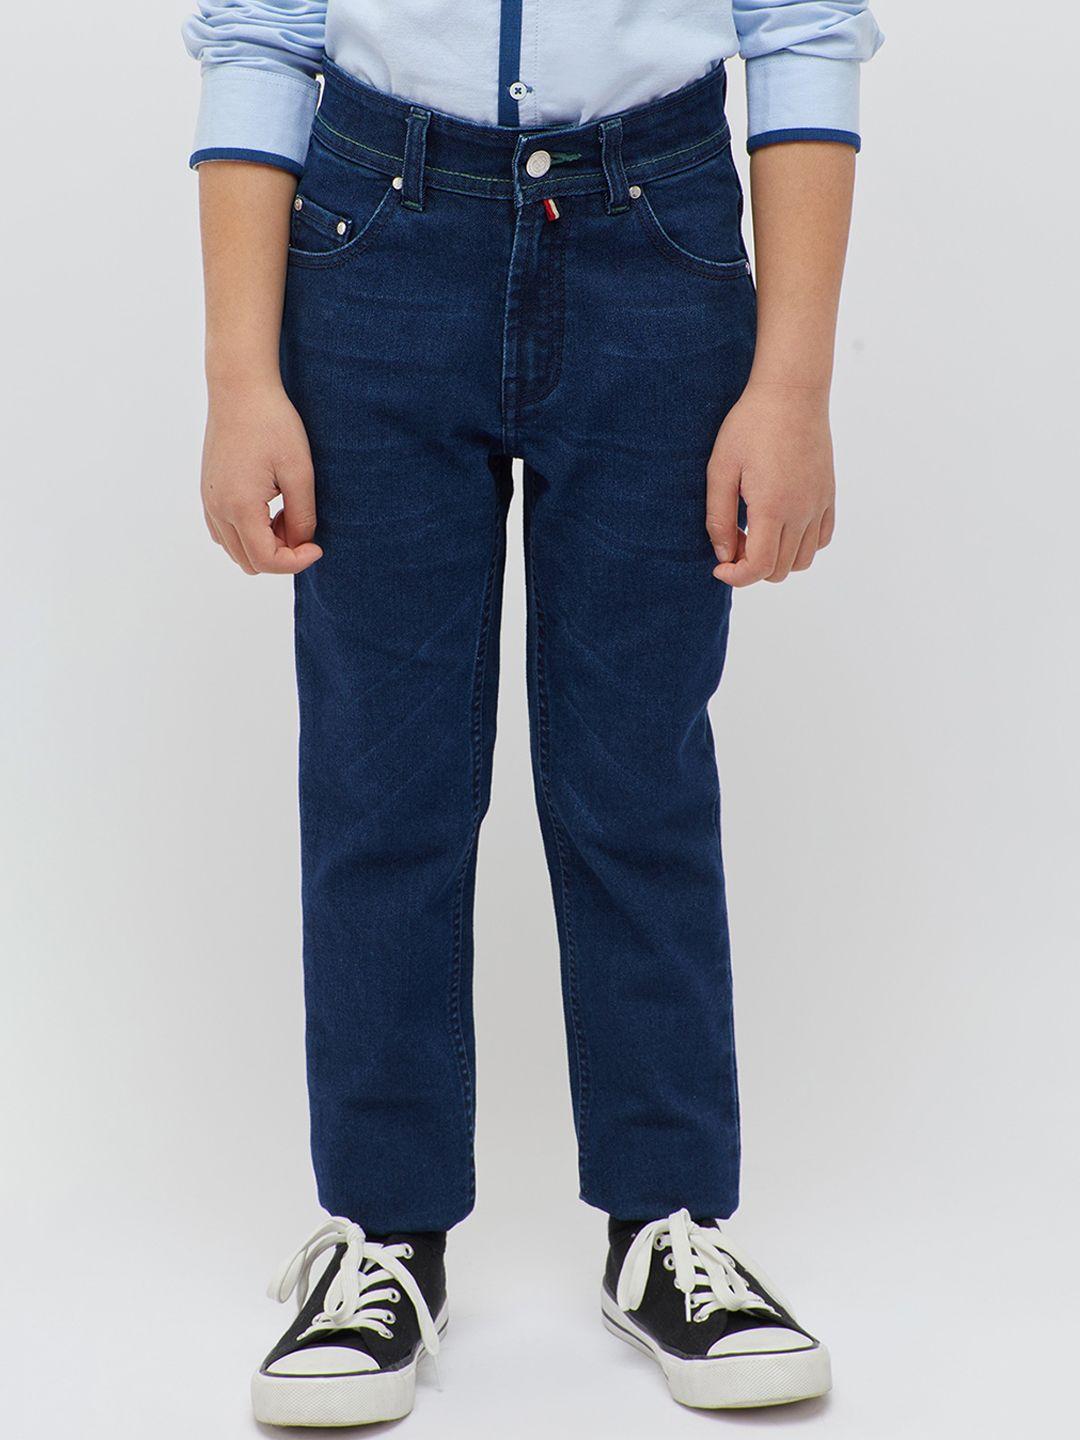 one friday boys mid-rise clean look no fad jeans